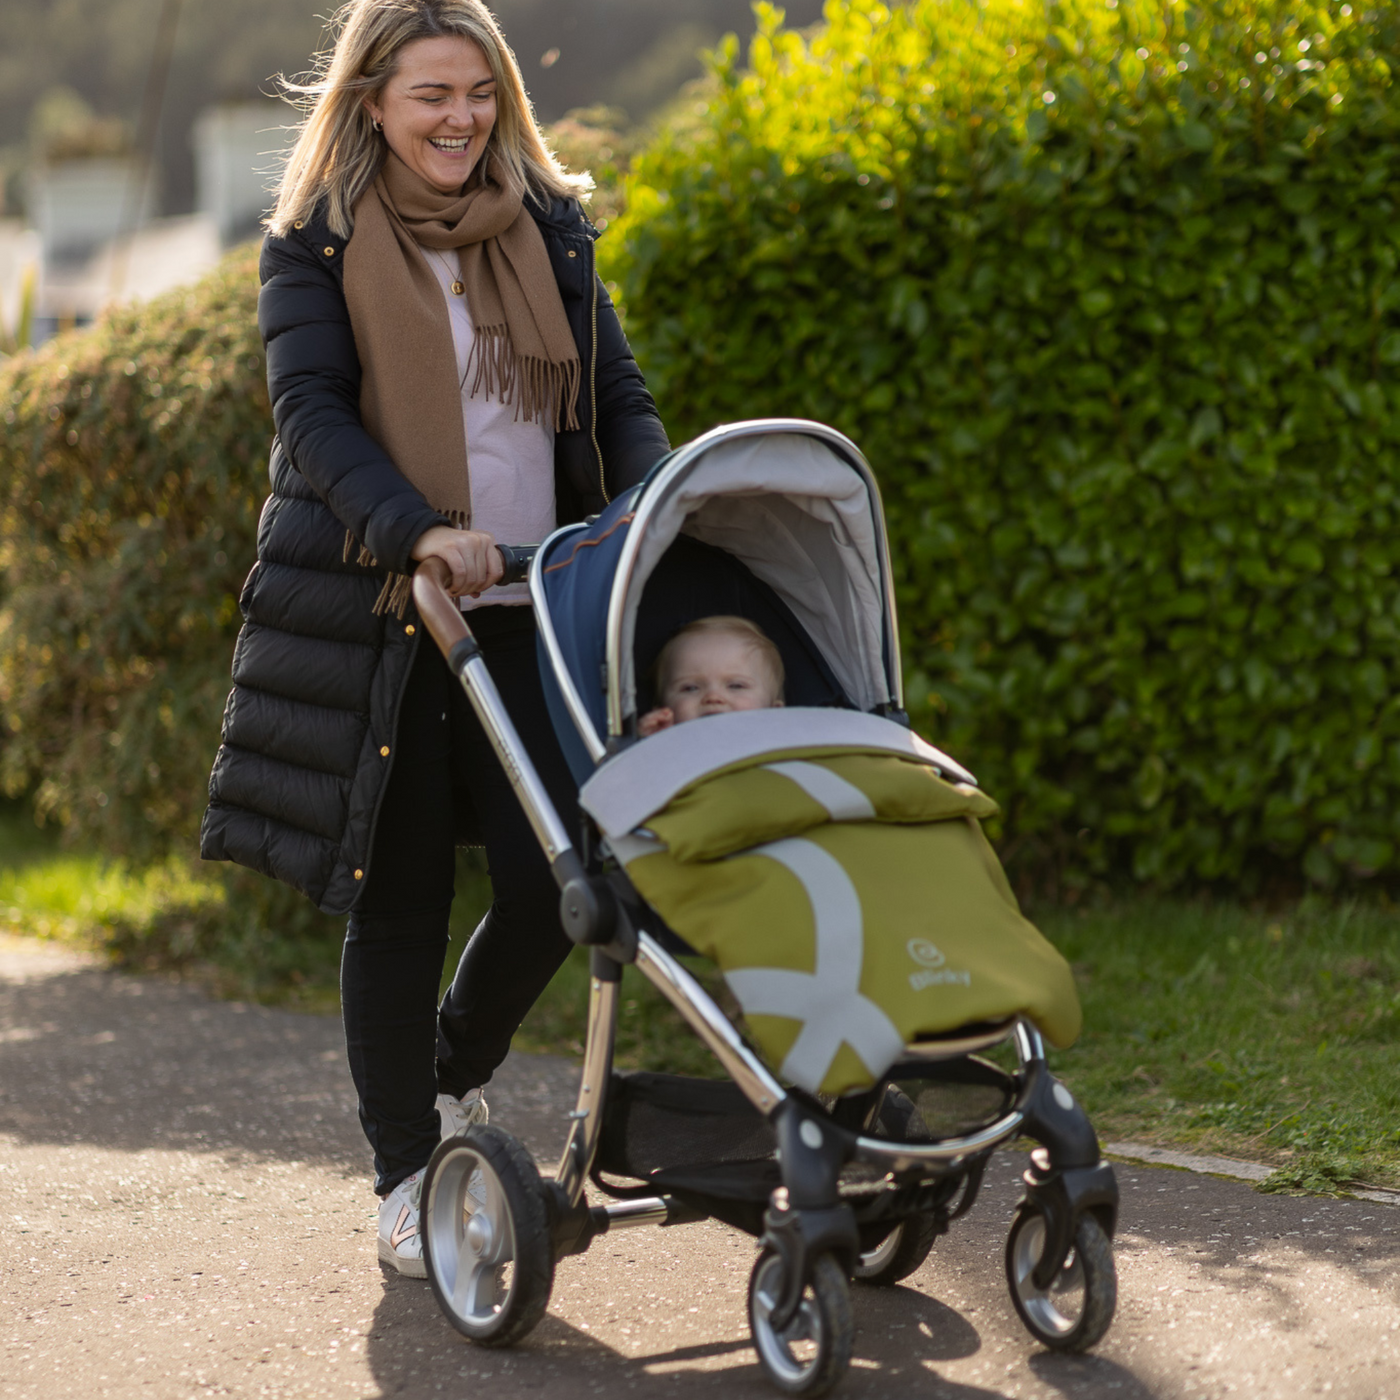 Lady pushing stroller with BlinkyWarm in Olive